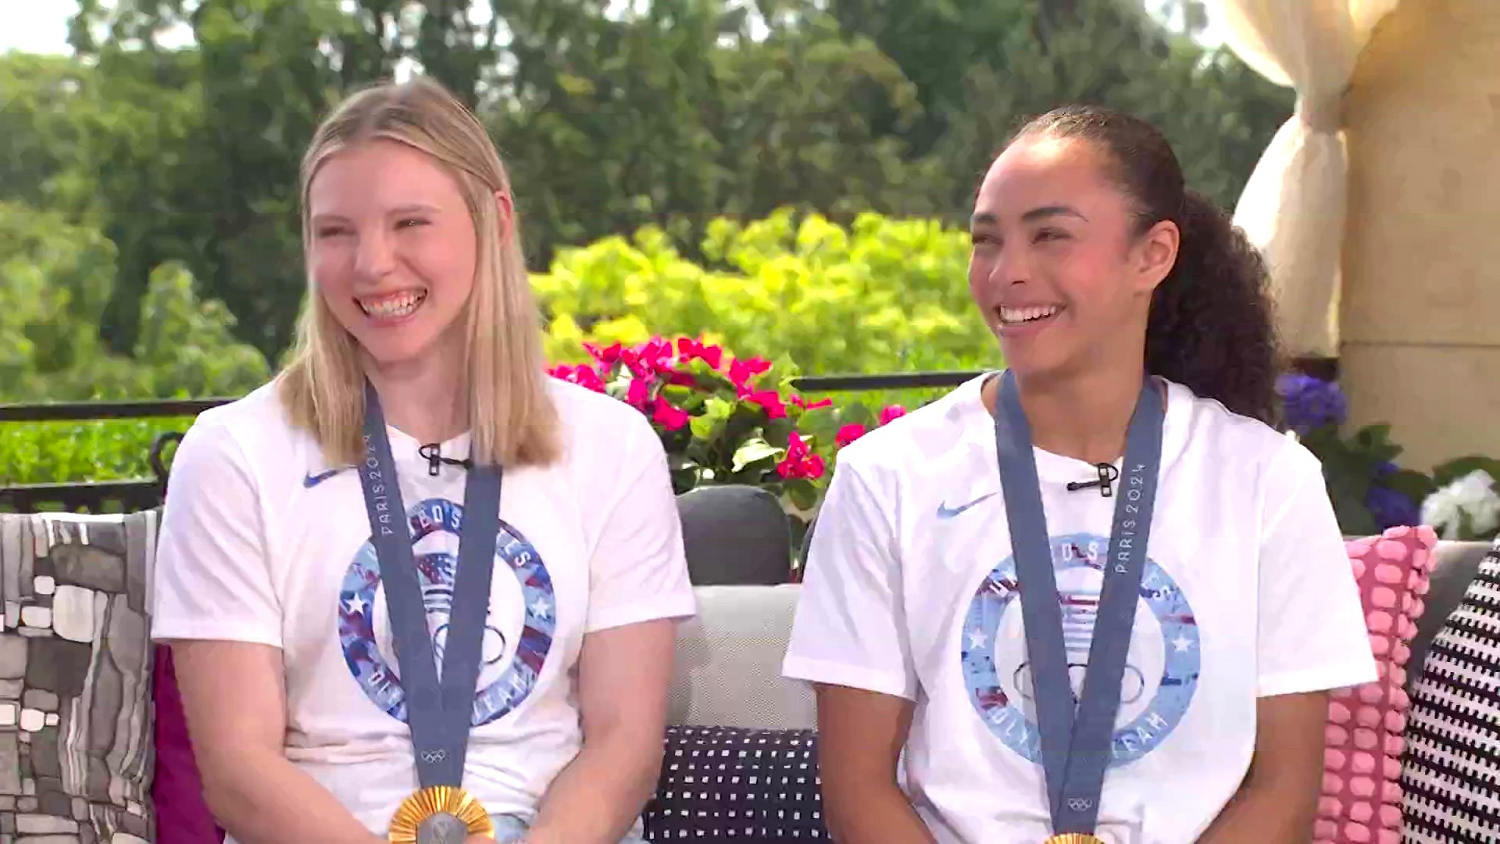 Jade Carey and Hezly Rivera talk winning gold in Paris: ‘So proud’